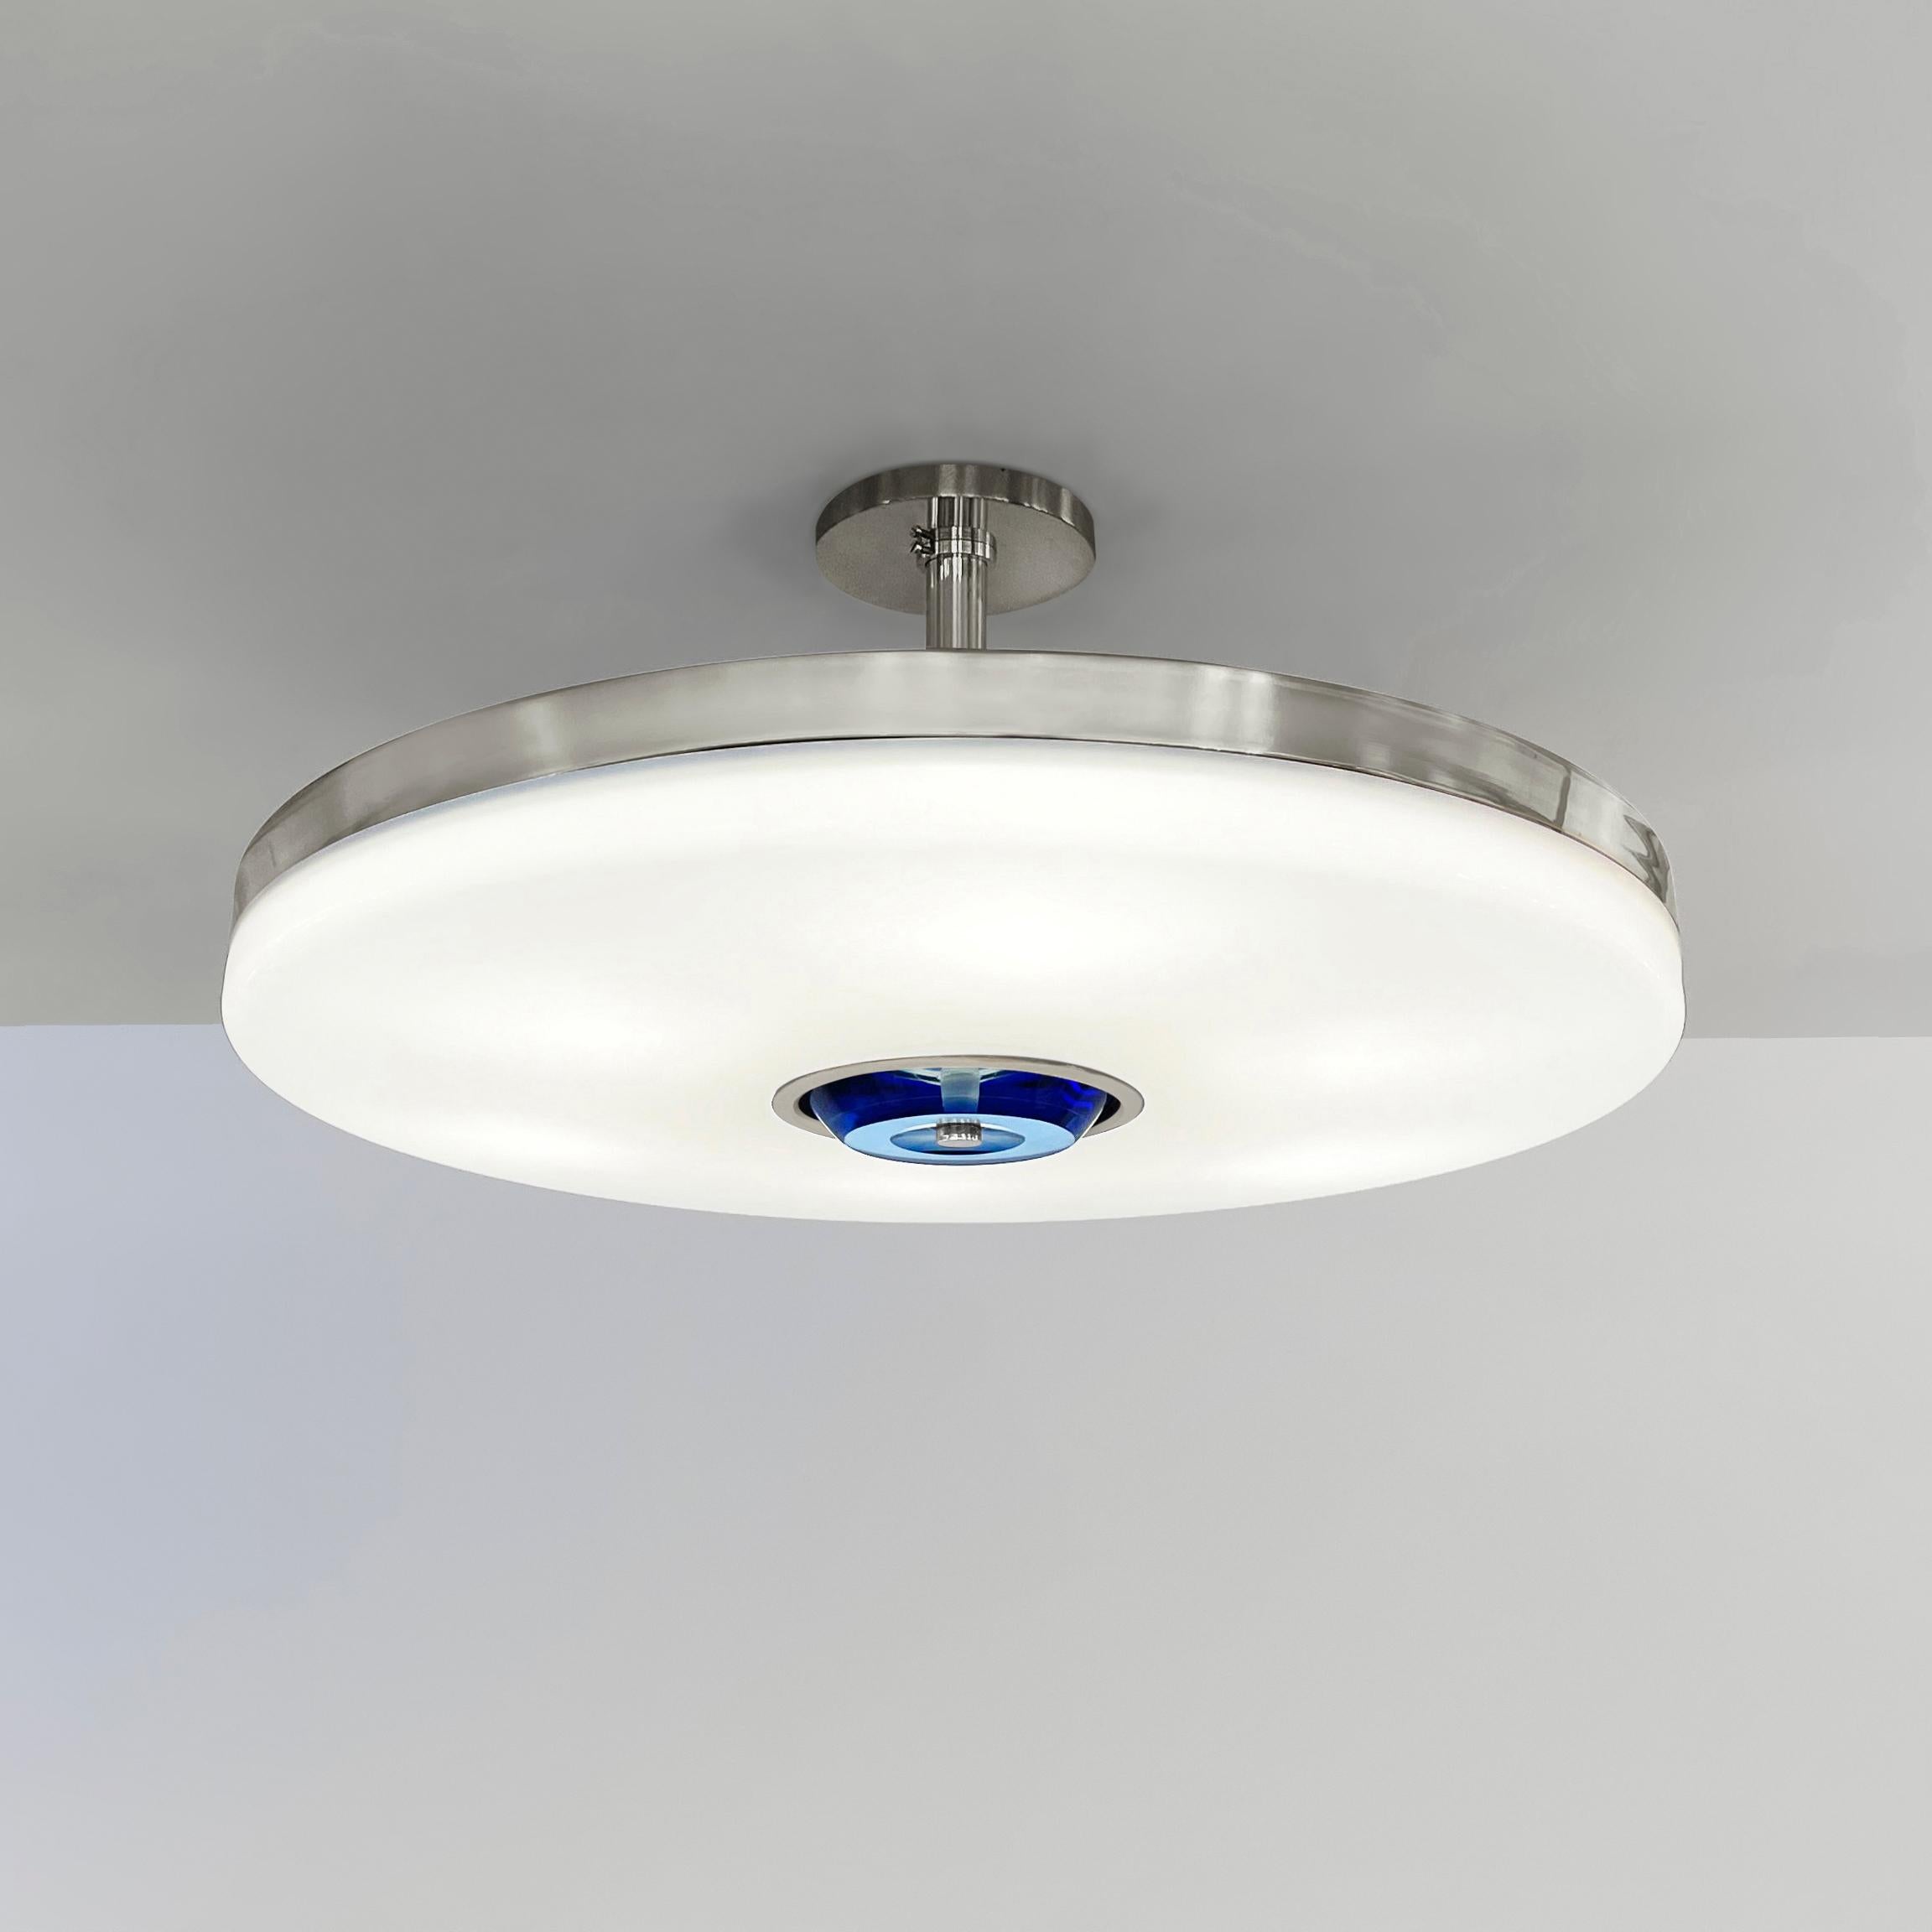 The Iris ceiling is designed around an expansive acrylic shade with a hand carved glass center. This versatile fixture can be installed as a pendant on a stem or as a true flush mount. The first images show the fixture in our polished nickel